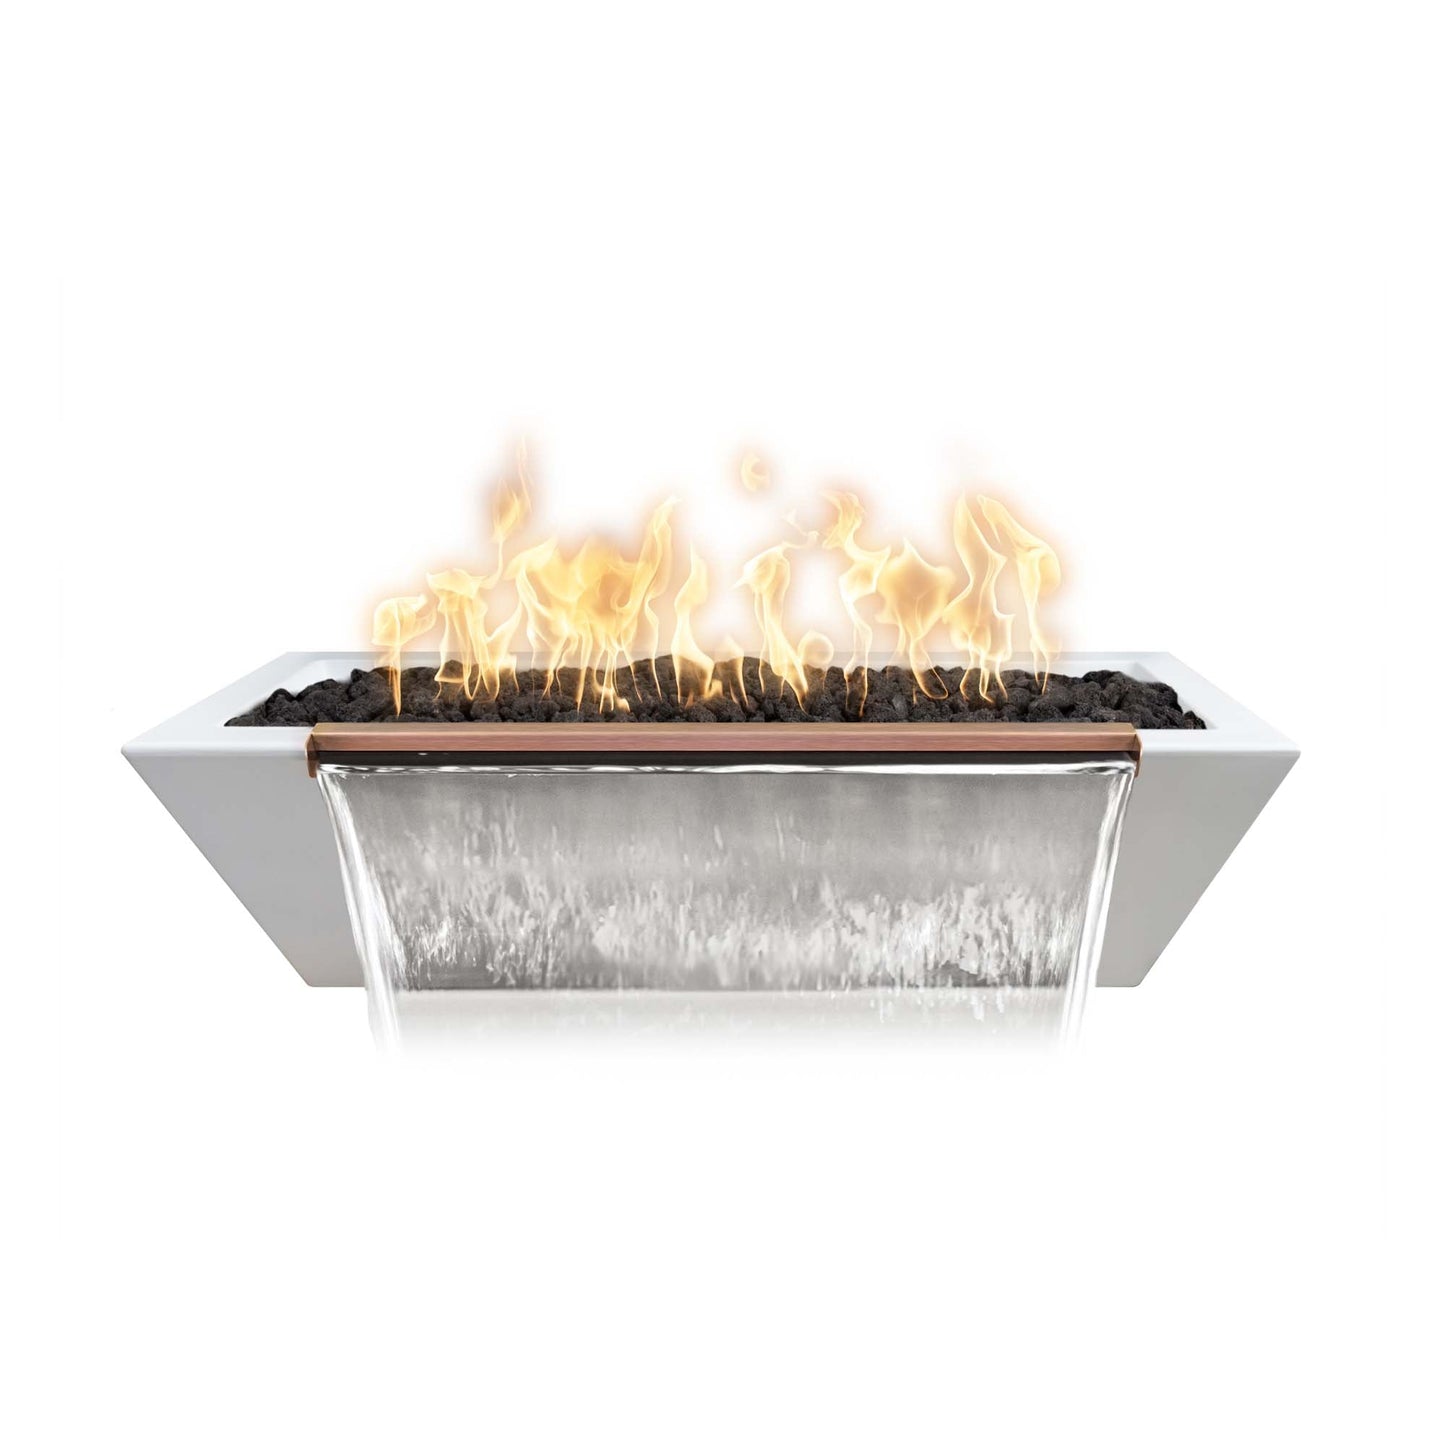 The Outdoor Plus Linear Maya 60" White GFRC Concrete Natural Gas Fire & Water Bowl with 12V Electronic Ignition